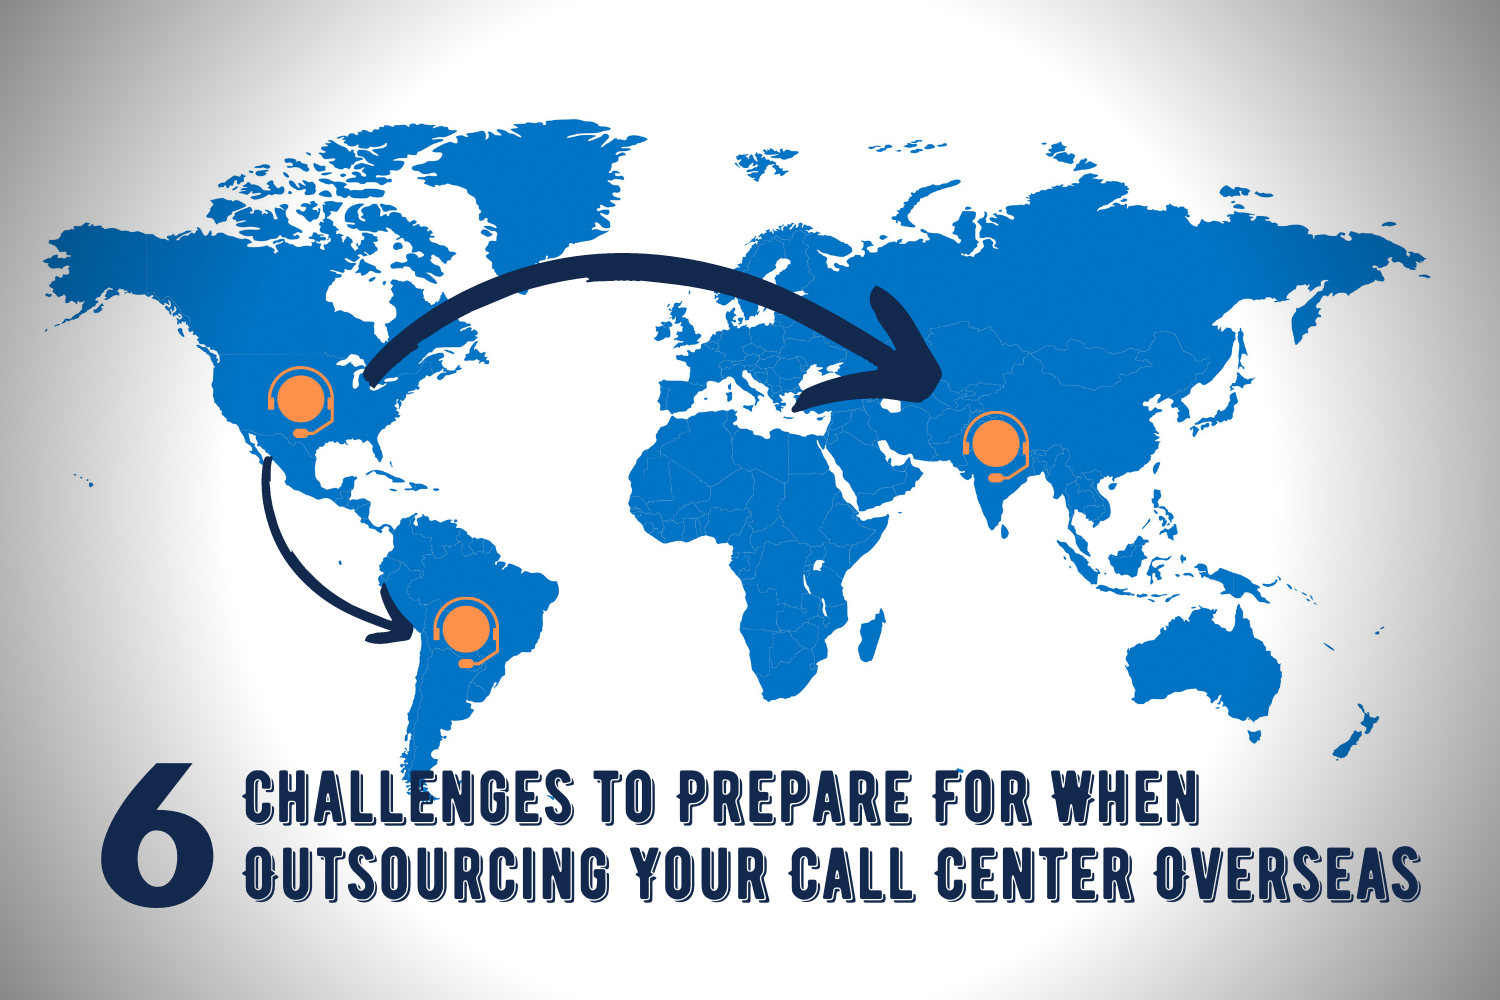 6 Challenges to Prepare For When Outsourcing Your Call Center Overseas